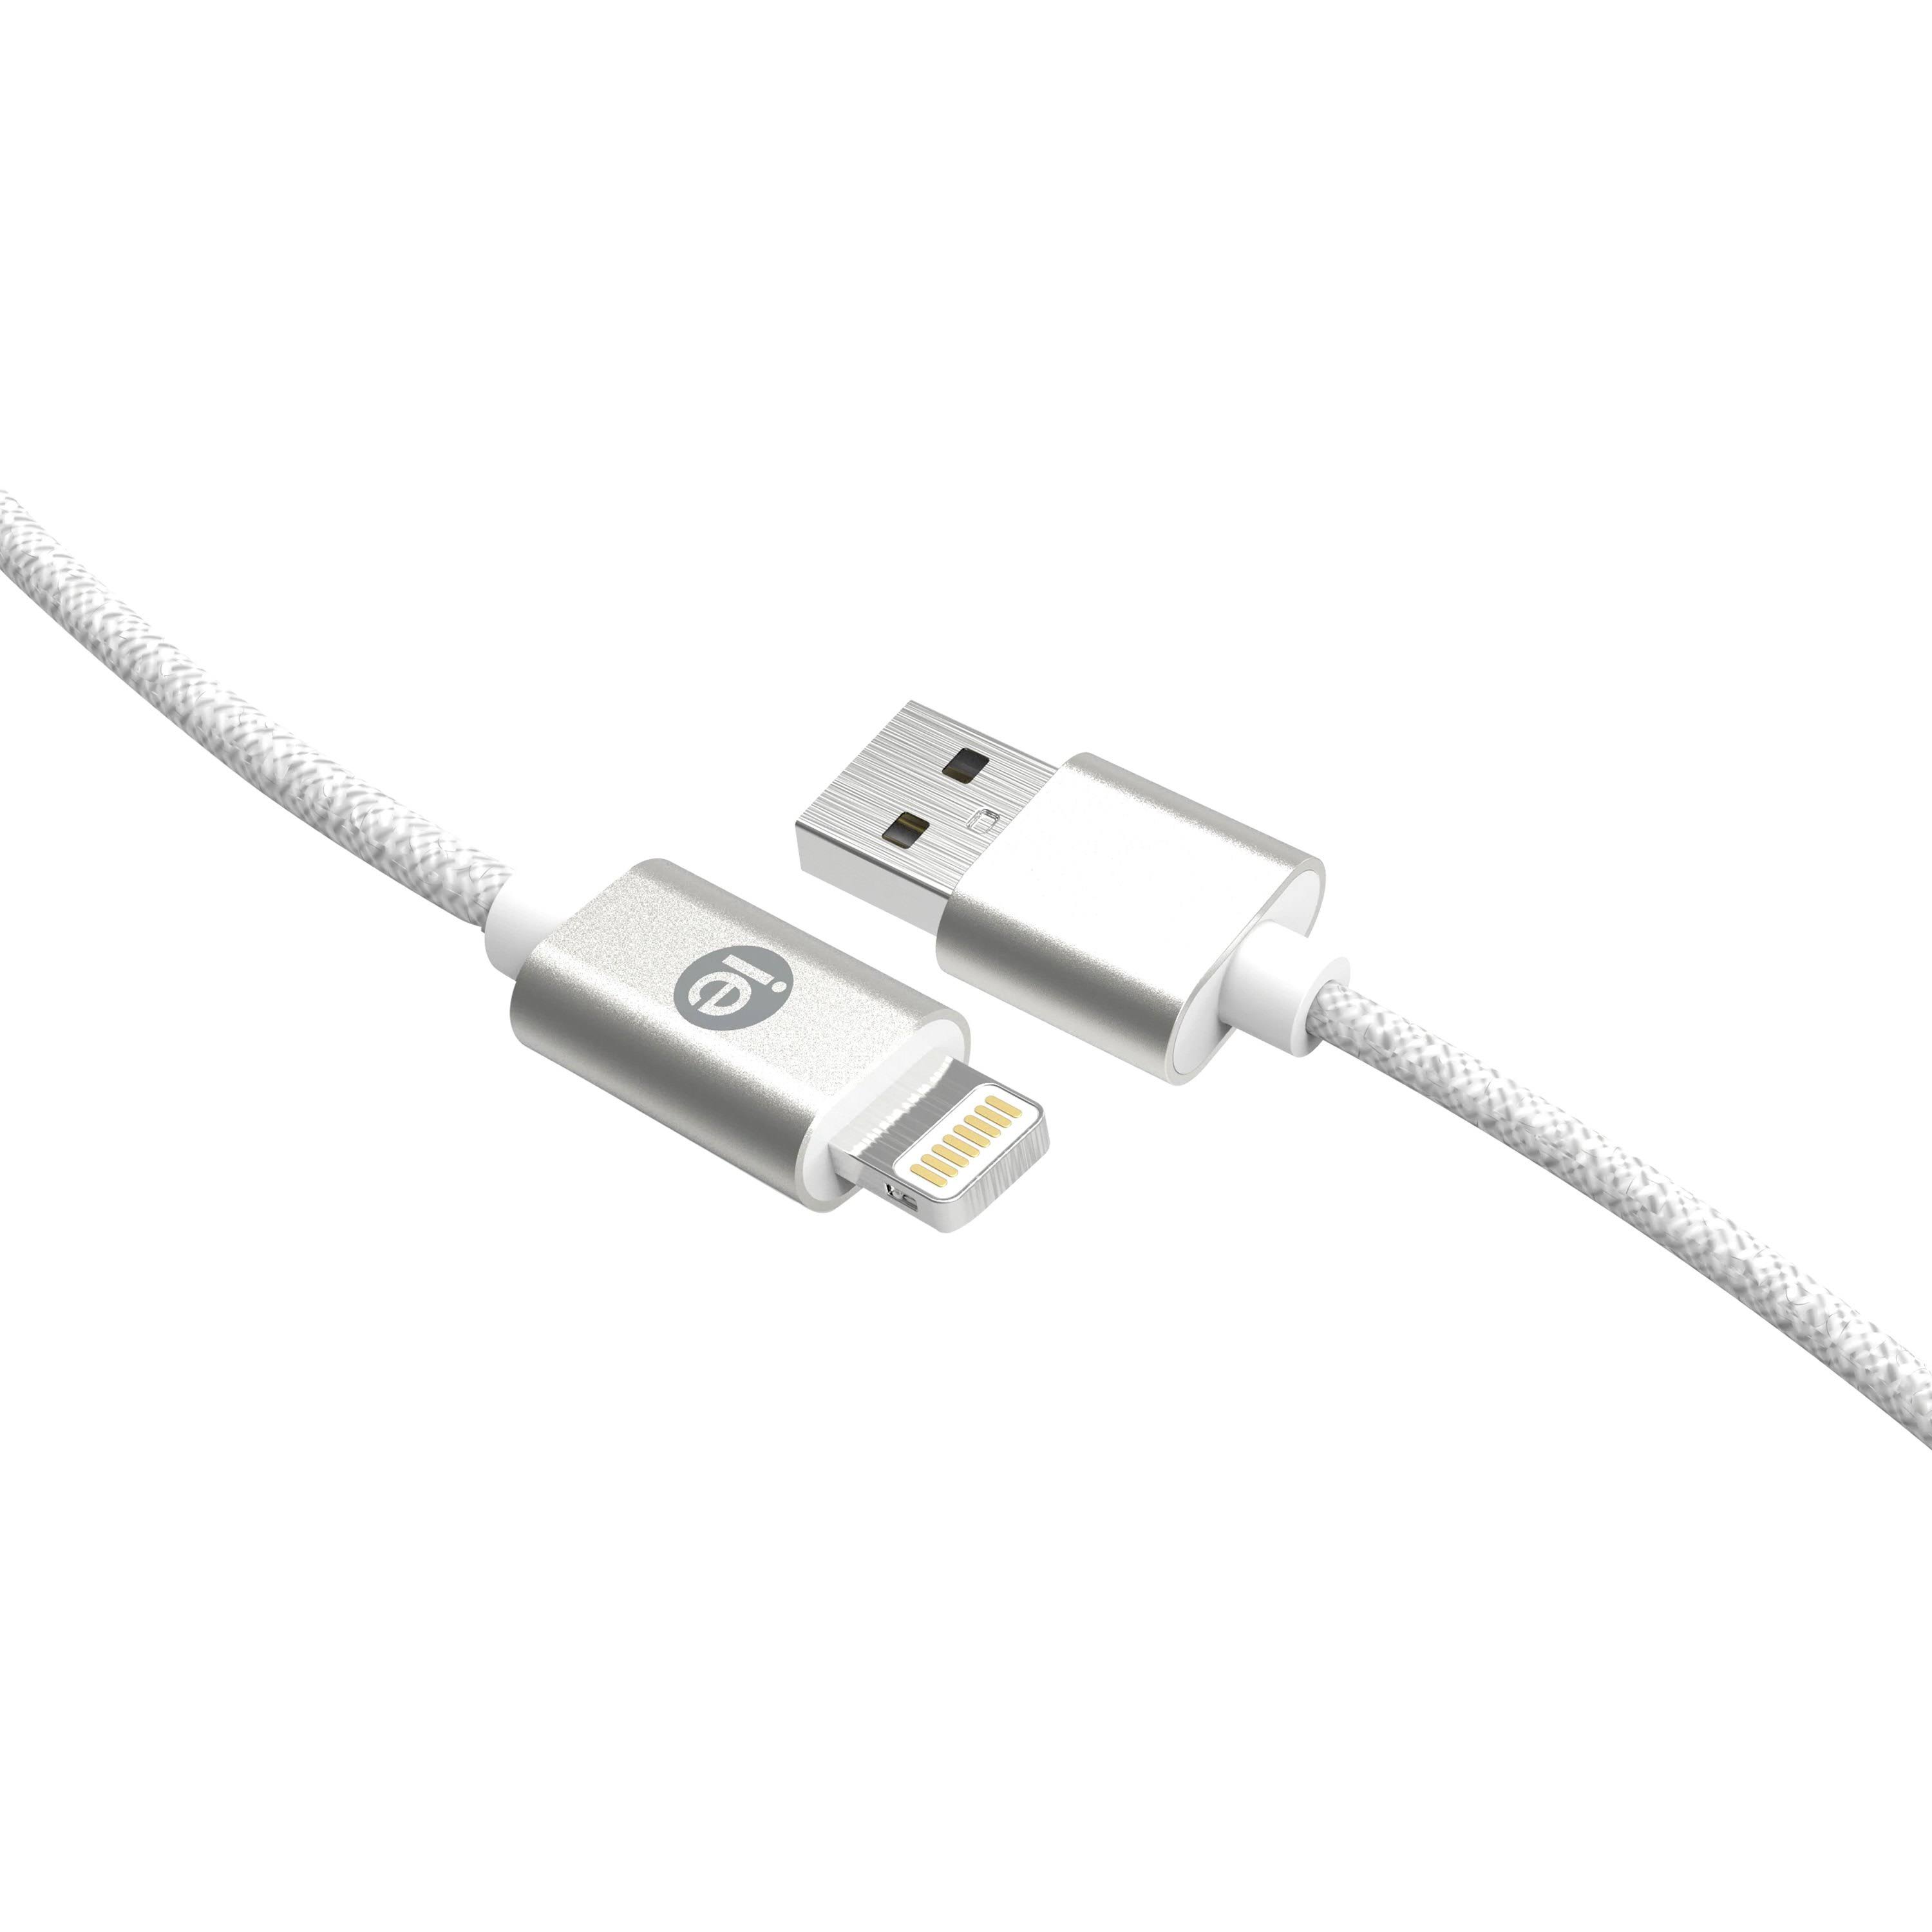 iEssentials Braided Lightning USB Cable, 6ft (White)